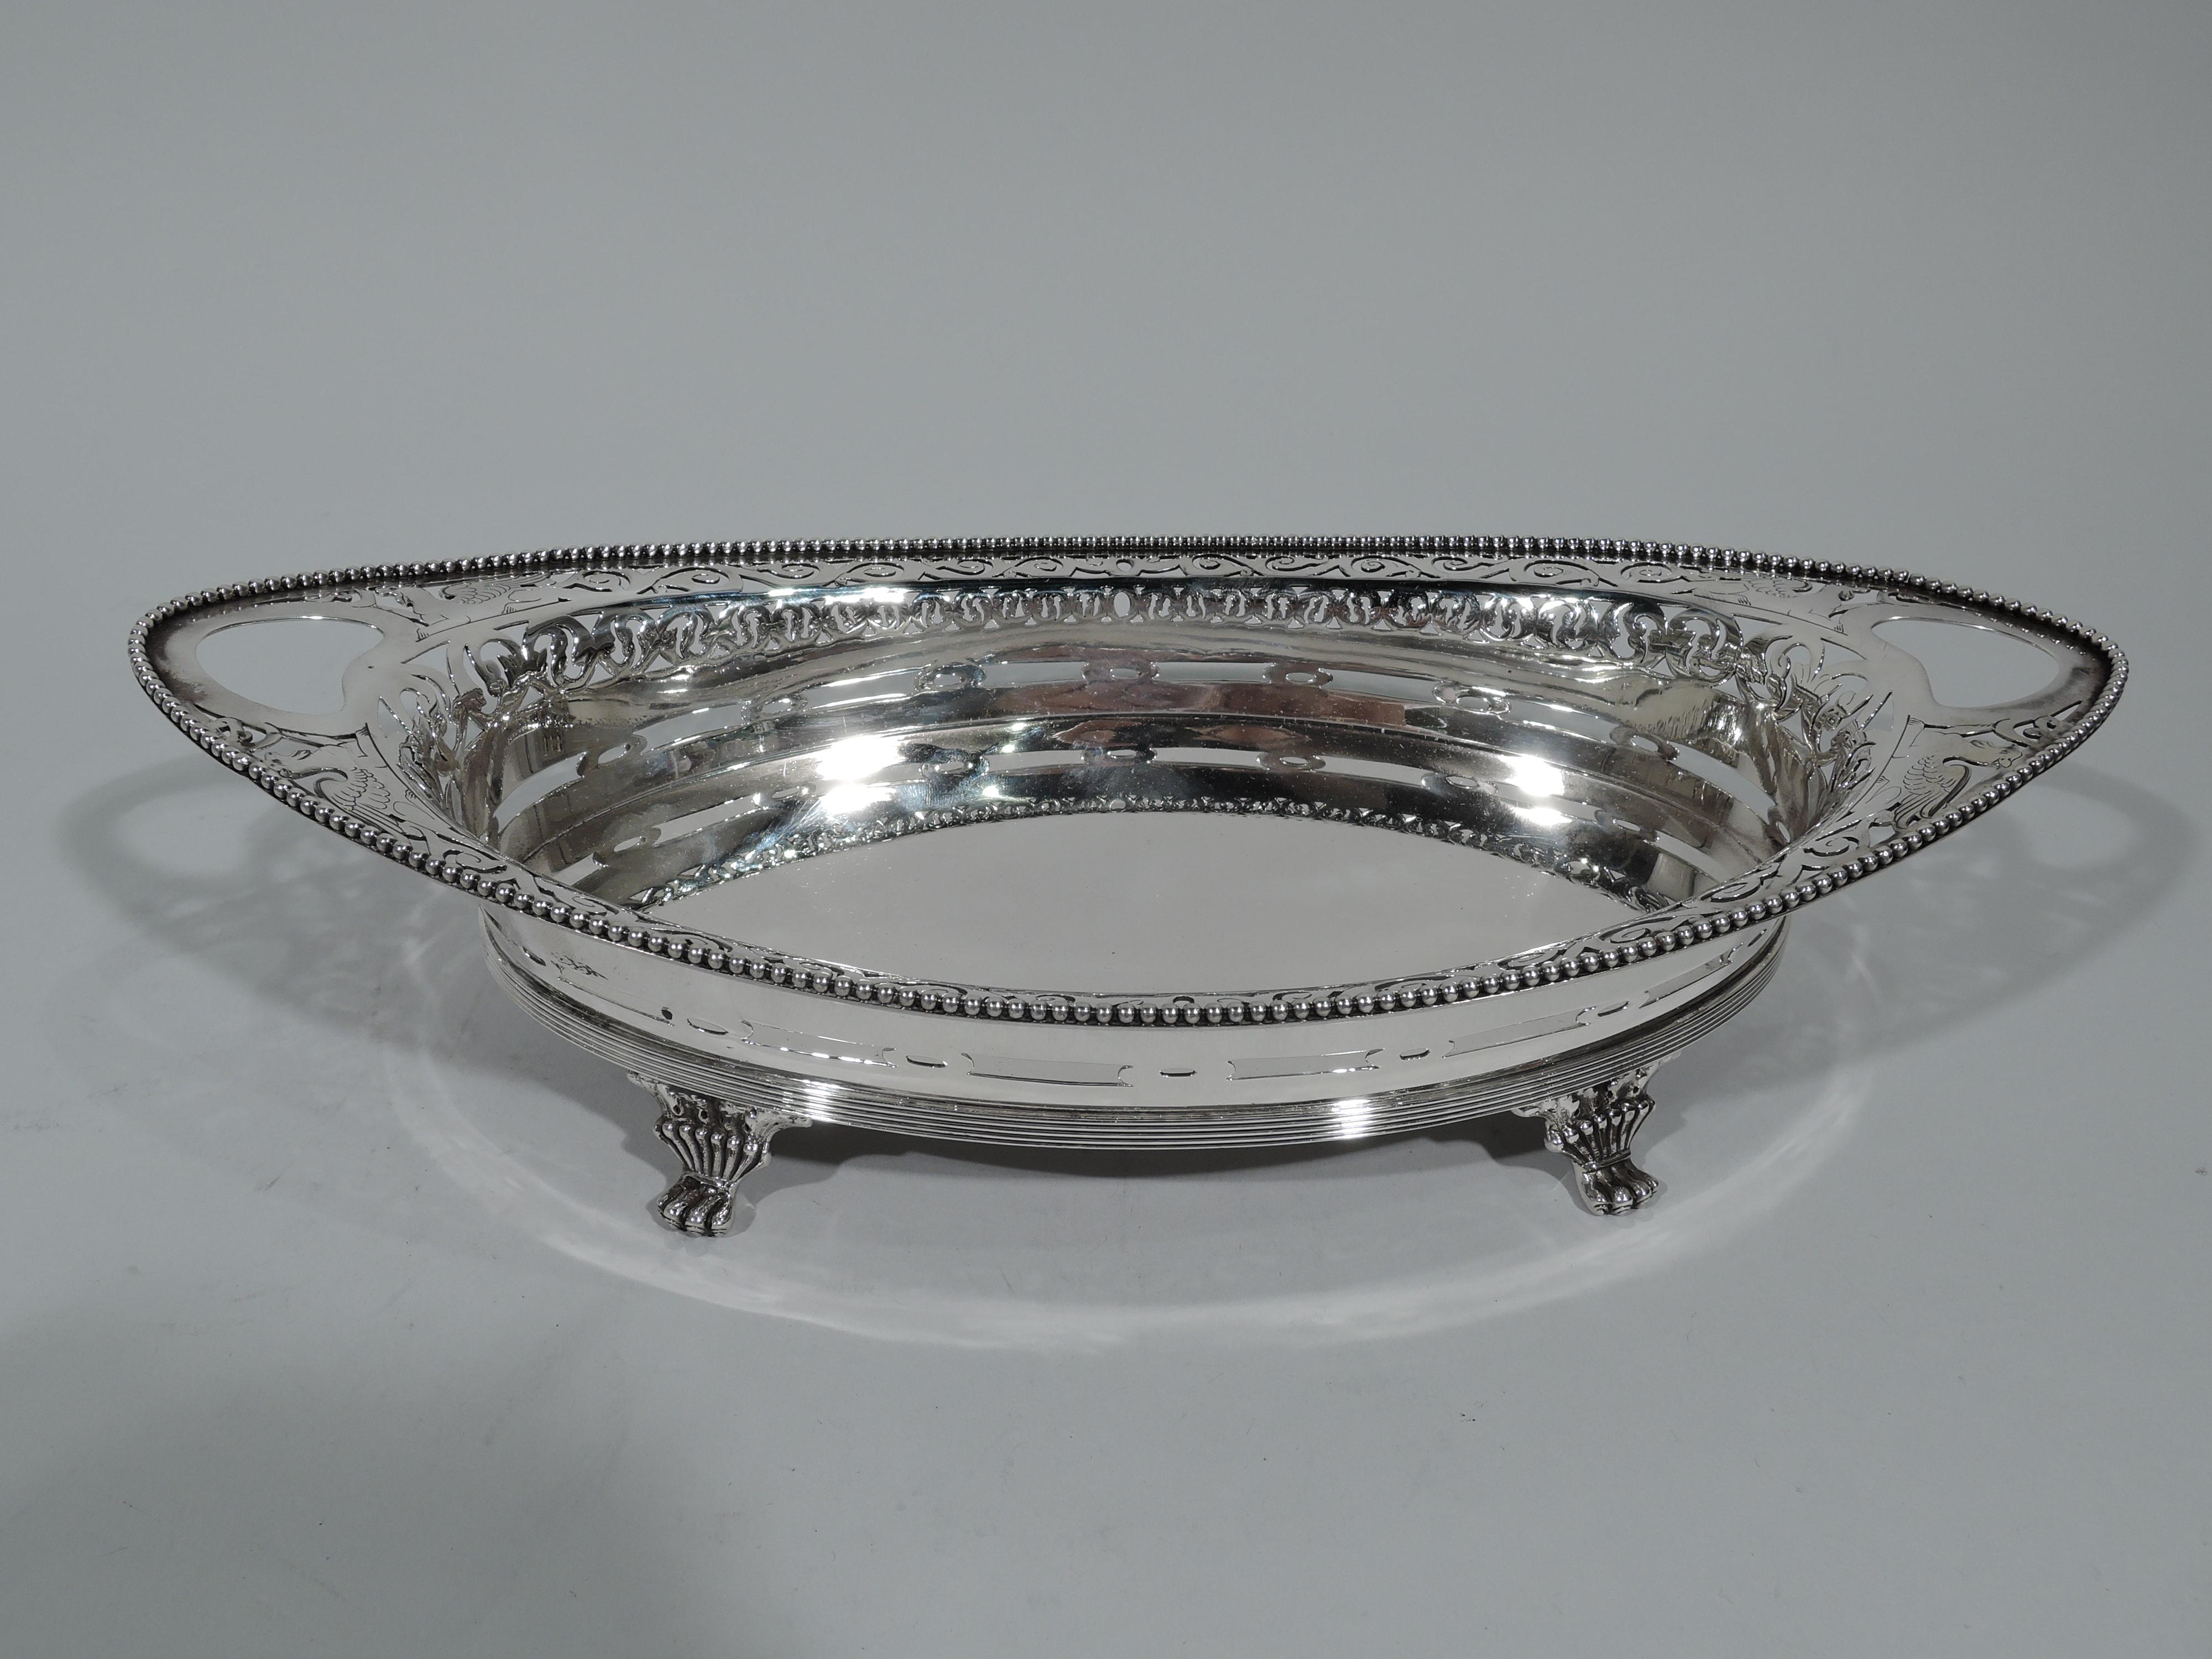 Neoclassical sterling silver bread tray. Made by Tiffany & Co. in New York. Solid oval well. Sides have pierced ornament including gryphons and rinceaux. Cutout kidney end handles and beaded rim. Reeded base and 4 leaf-mounted paw supports. Hallmark